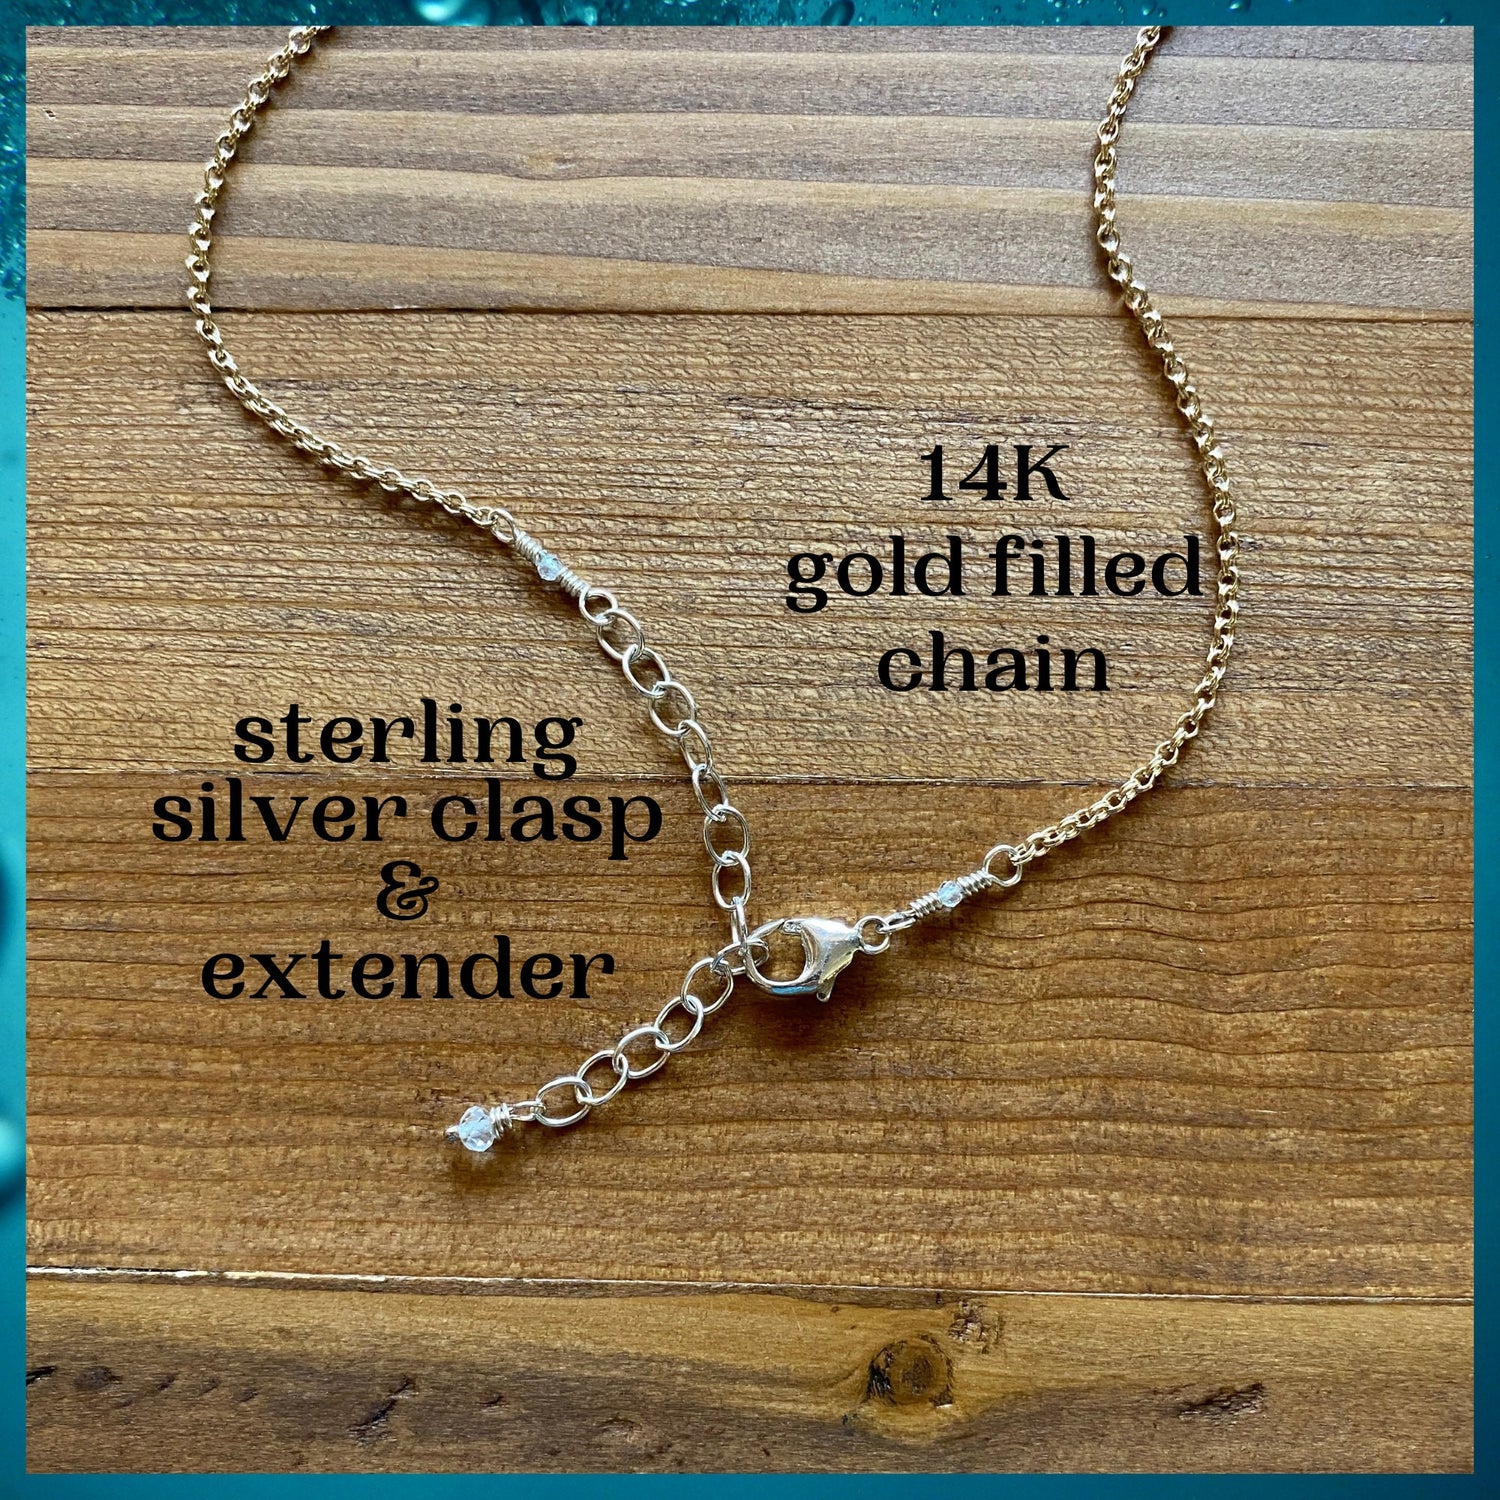 50th Birthday Mid Size Mixed Metal Milestone Birthstone Necklace , Silver Sparkly Circles Pendant on Gold Fill Chain 5 Rings for 5 Decades